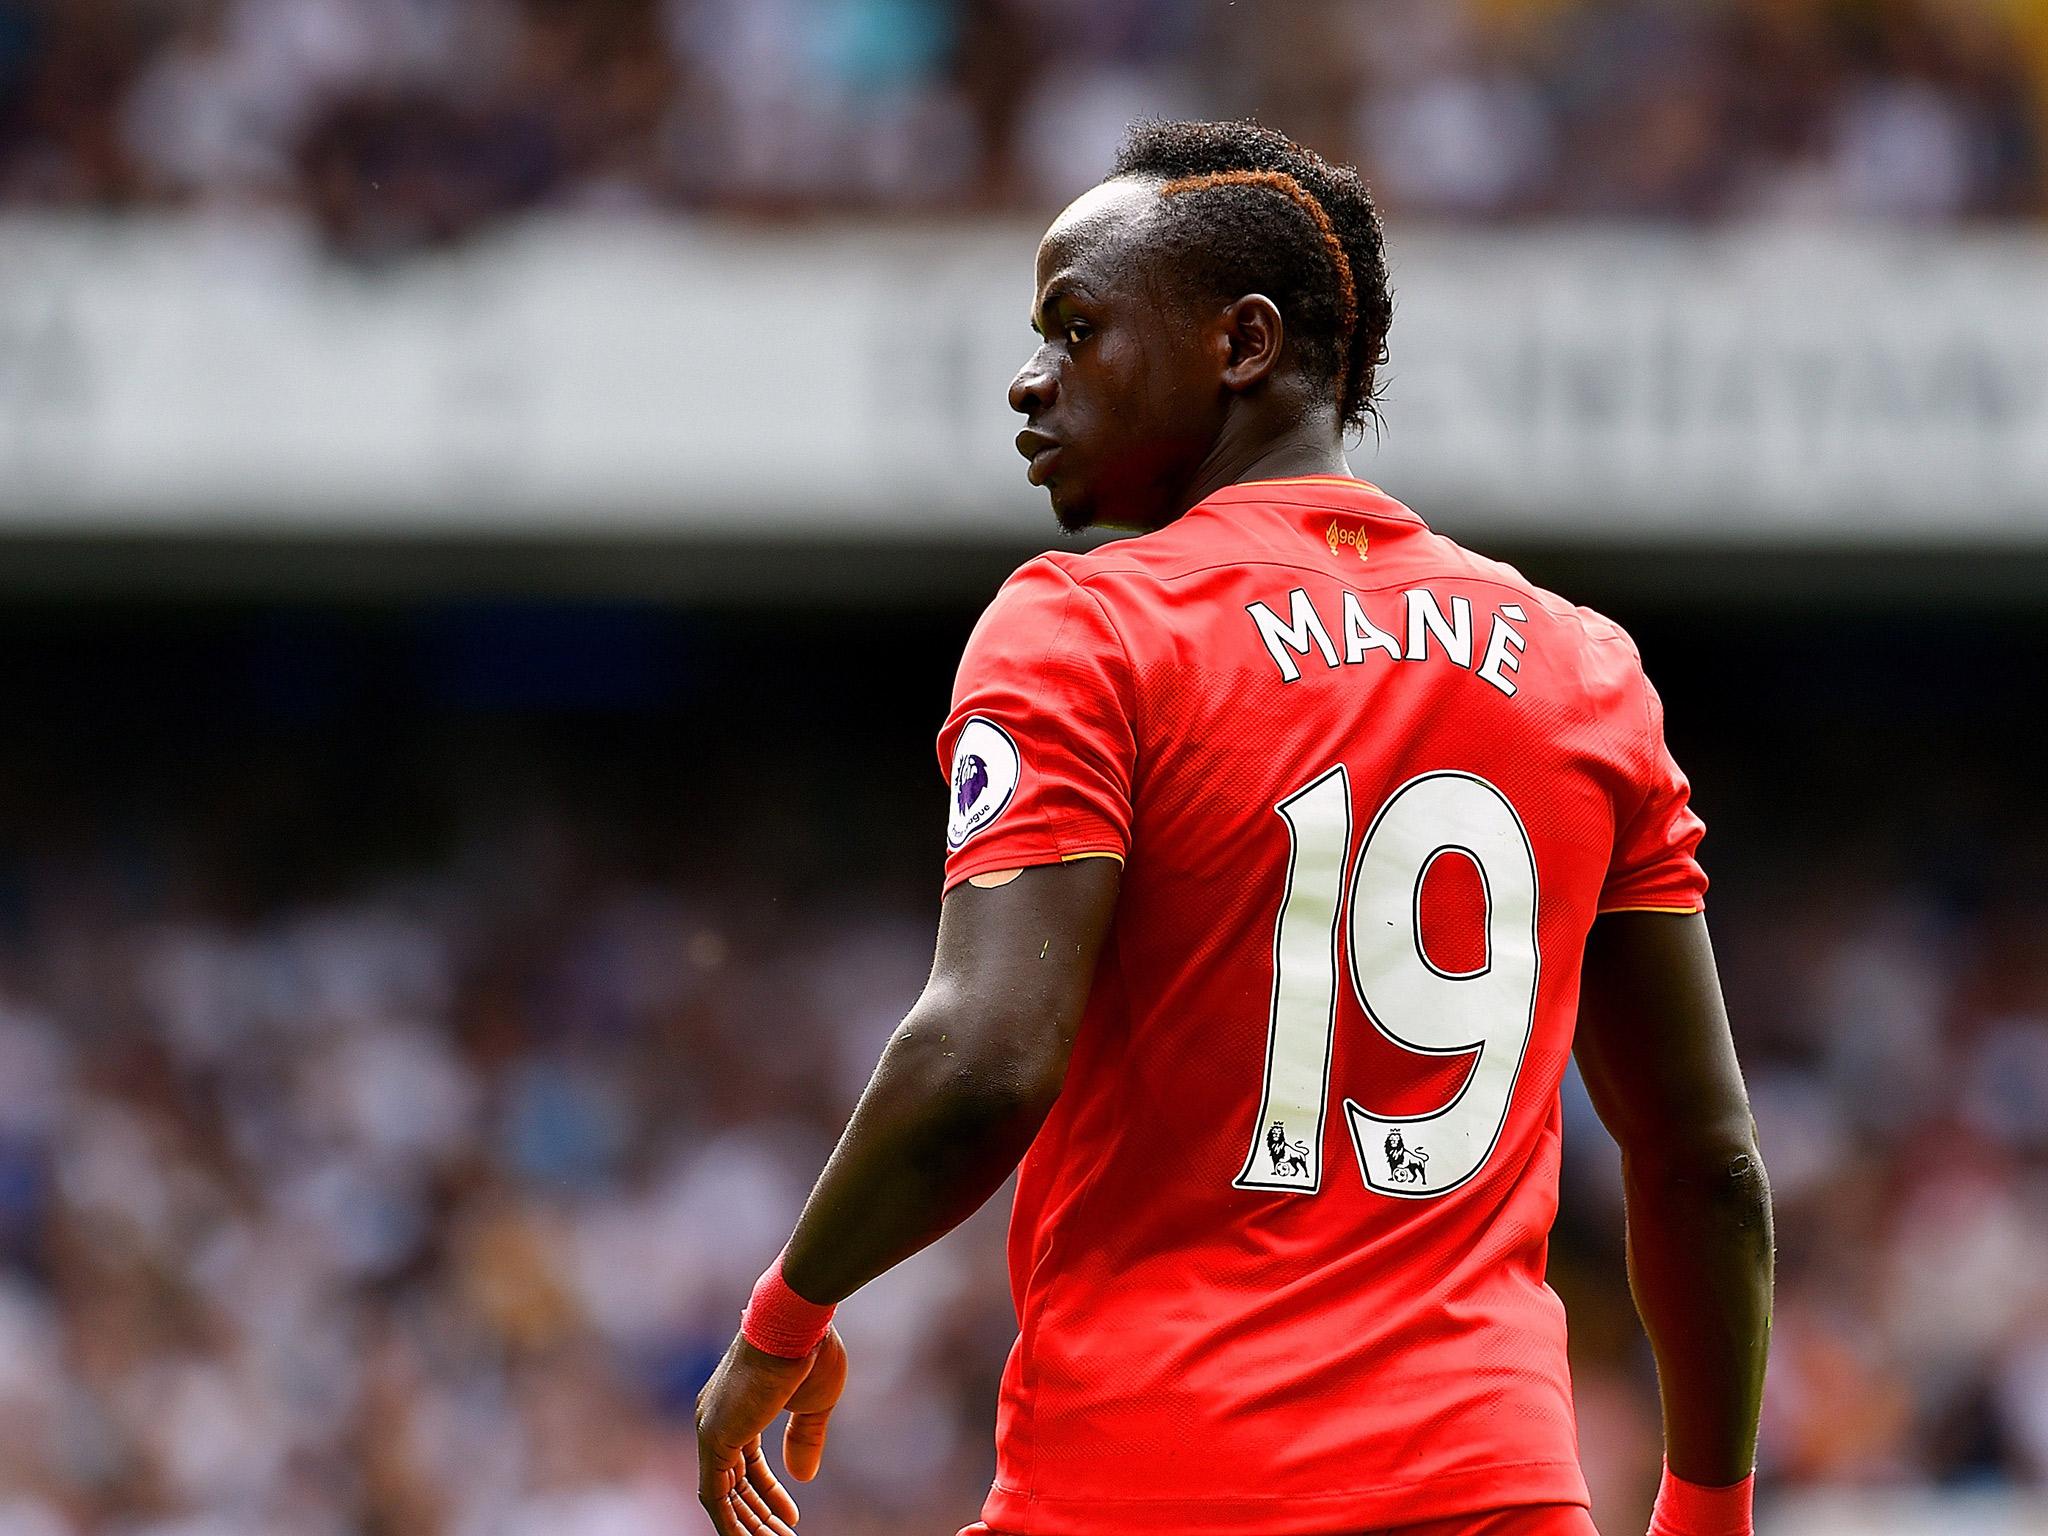 Liverpool news: Sadio Mane allays injury fears on return from Senegal duty ahead of Leicester